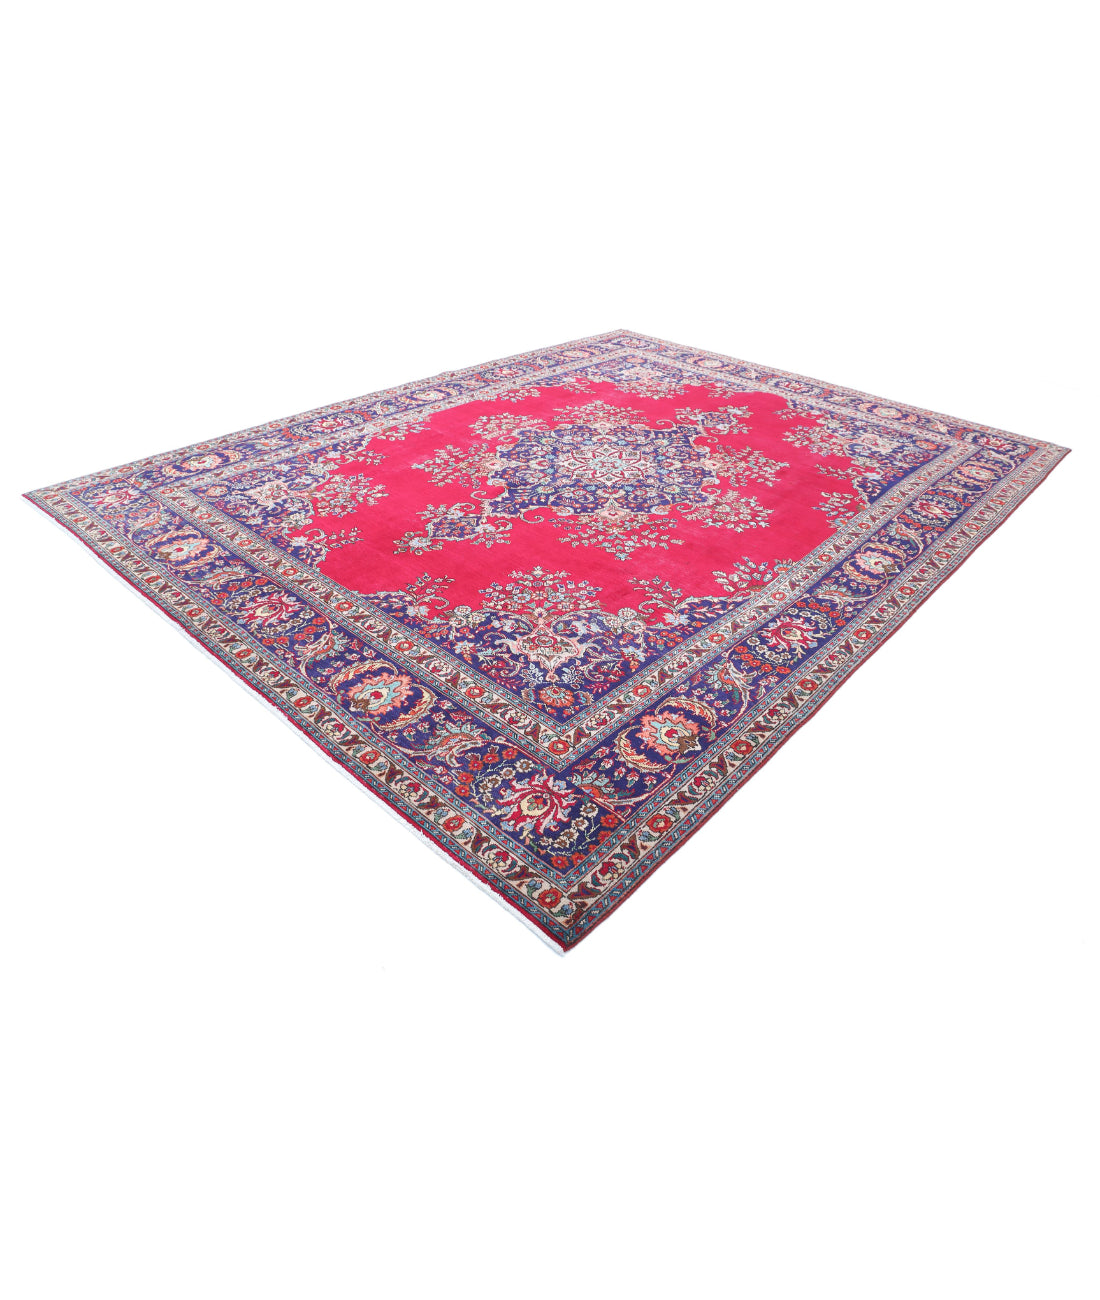 Hand Knotted Persian Tabriz Wool Rug - 9'11'' x 13'3'' 9'11'' x 13'3'' (298 X 398) / Red / Blue